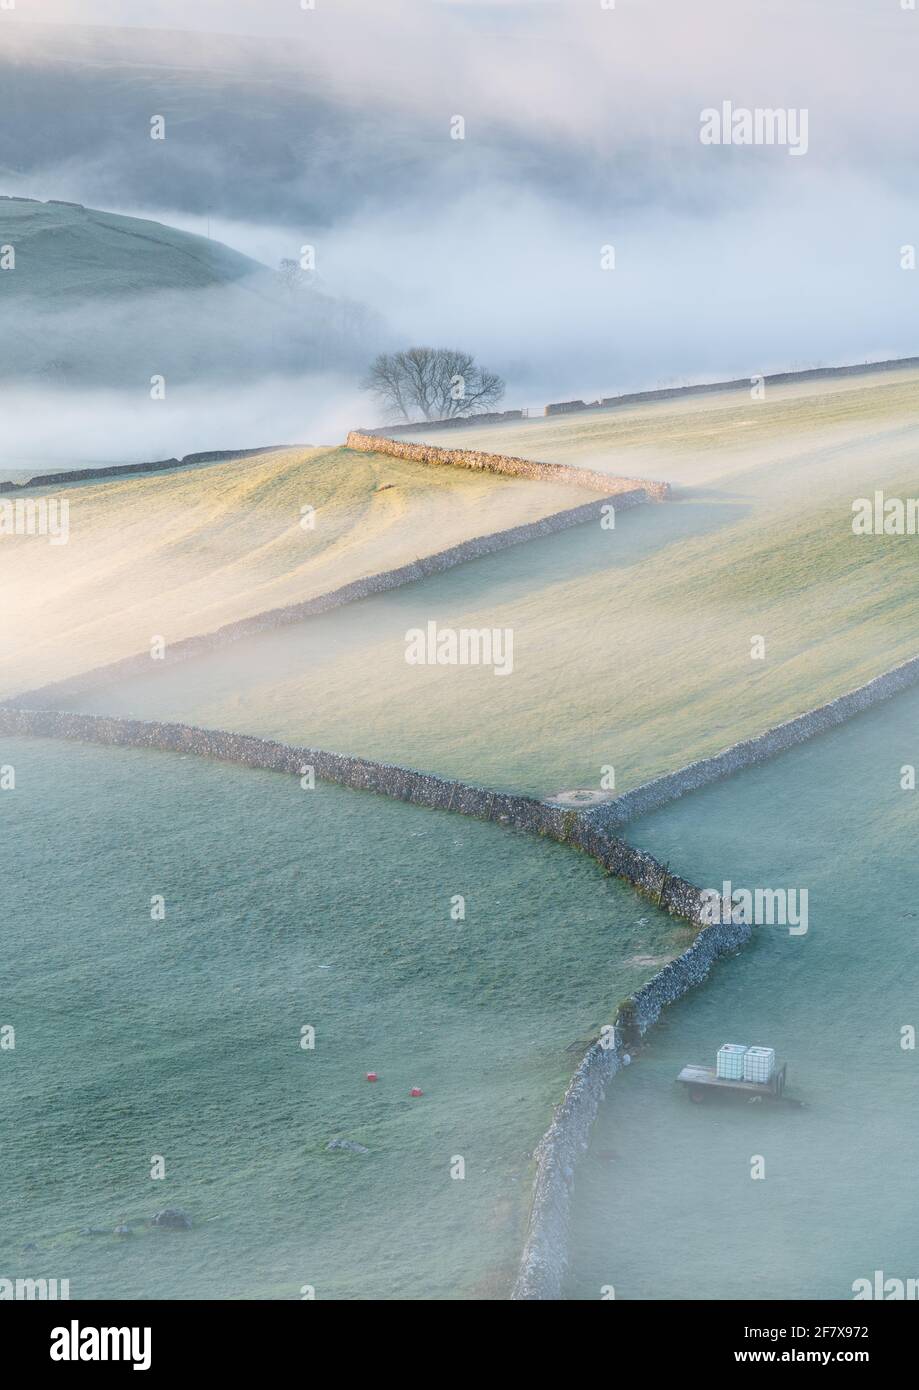 Dry Stone Walls crisscross the rural landscape beneath Malham Lings in The Yorkshire Dales National Park on a foggy spring morning. Stock Photo